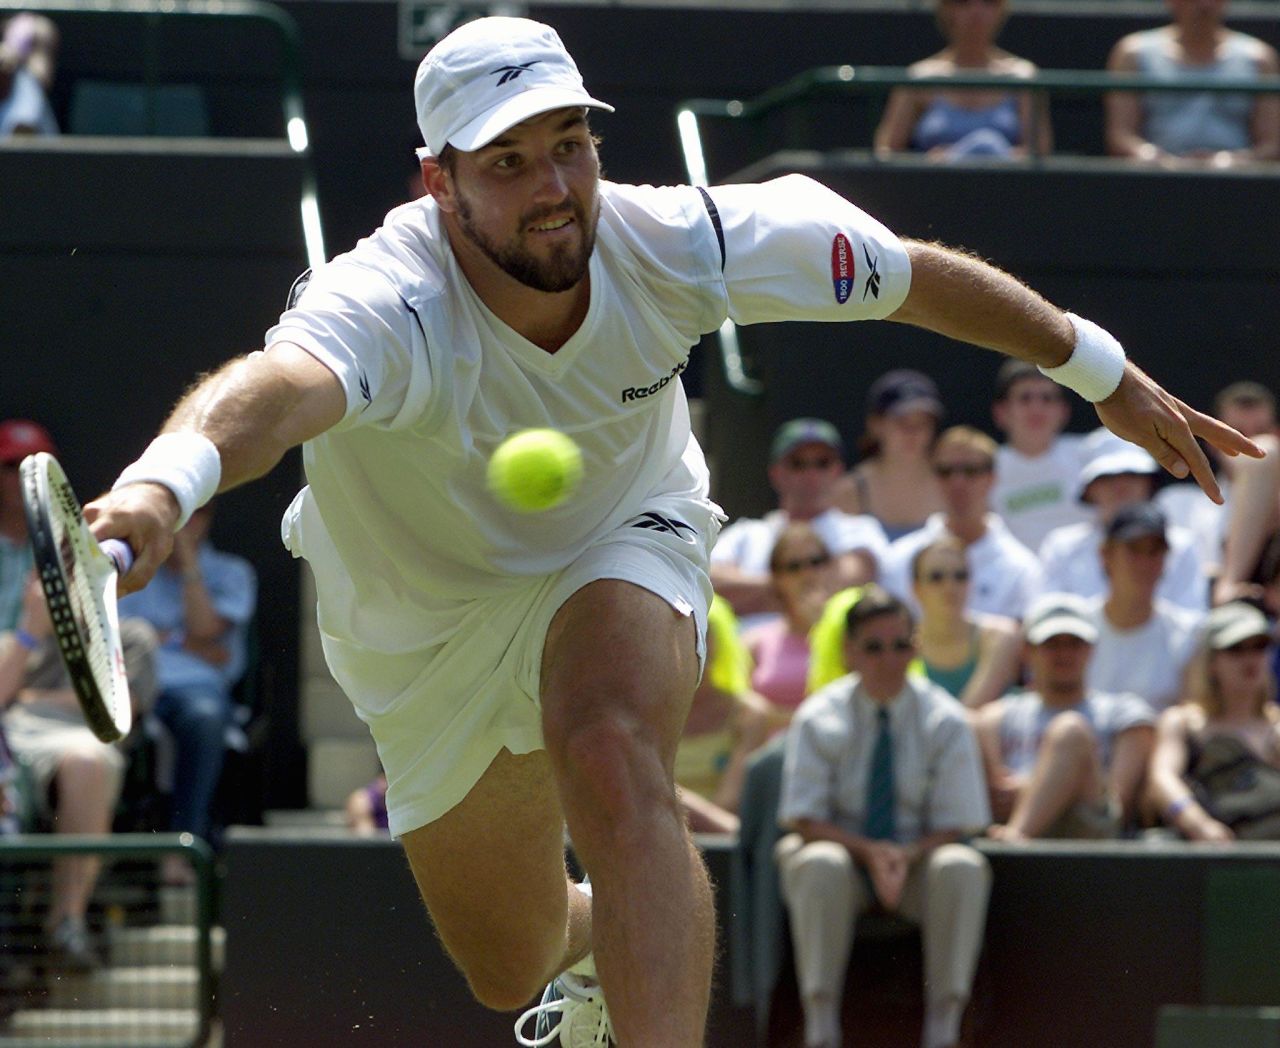 One of the most naturally gifted serve and volley players, Pat Rafter combined pinpoint placement with silky work at the net. The Australian twice fell short in the Wimbledon final but won two U.S. Opens in the late 1990s.